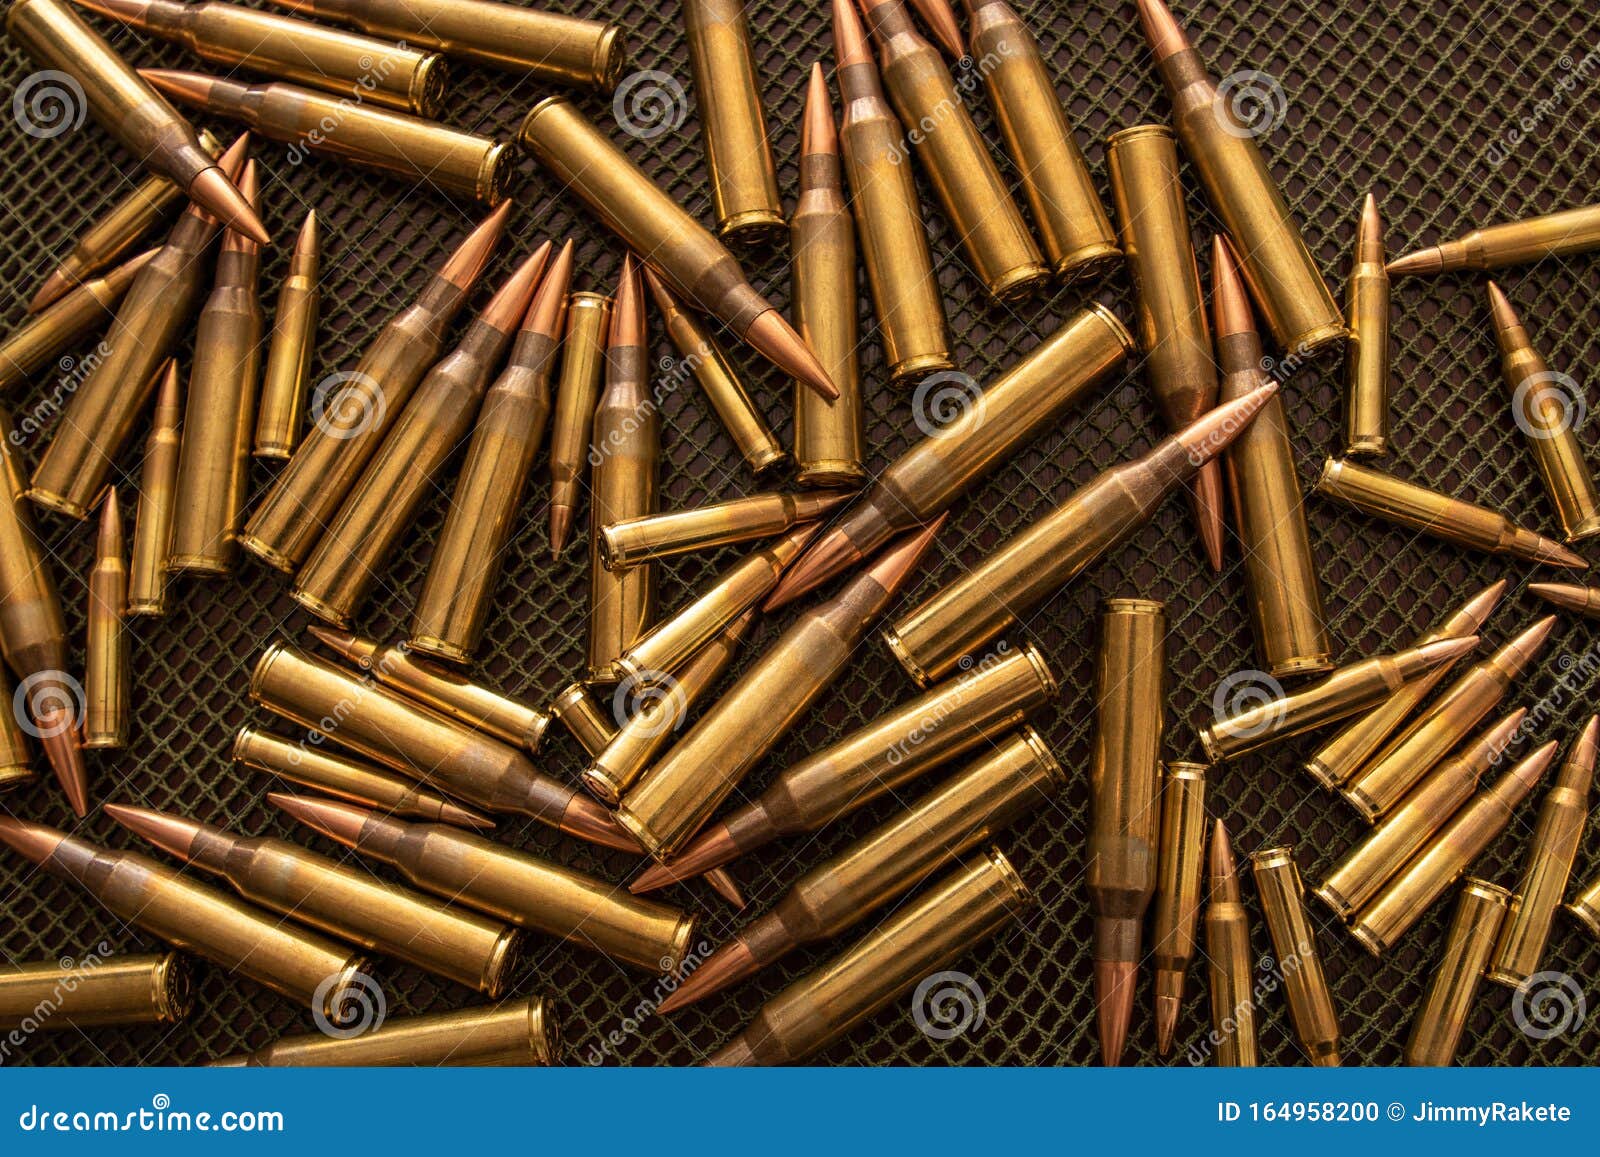 many bullets calibre .338 and .223 on a table with a green net